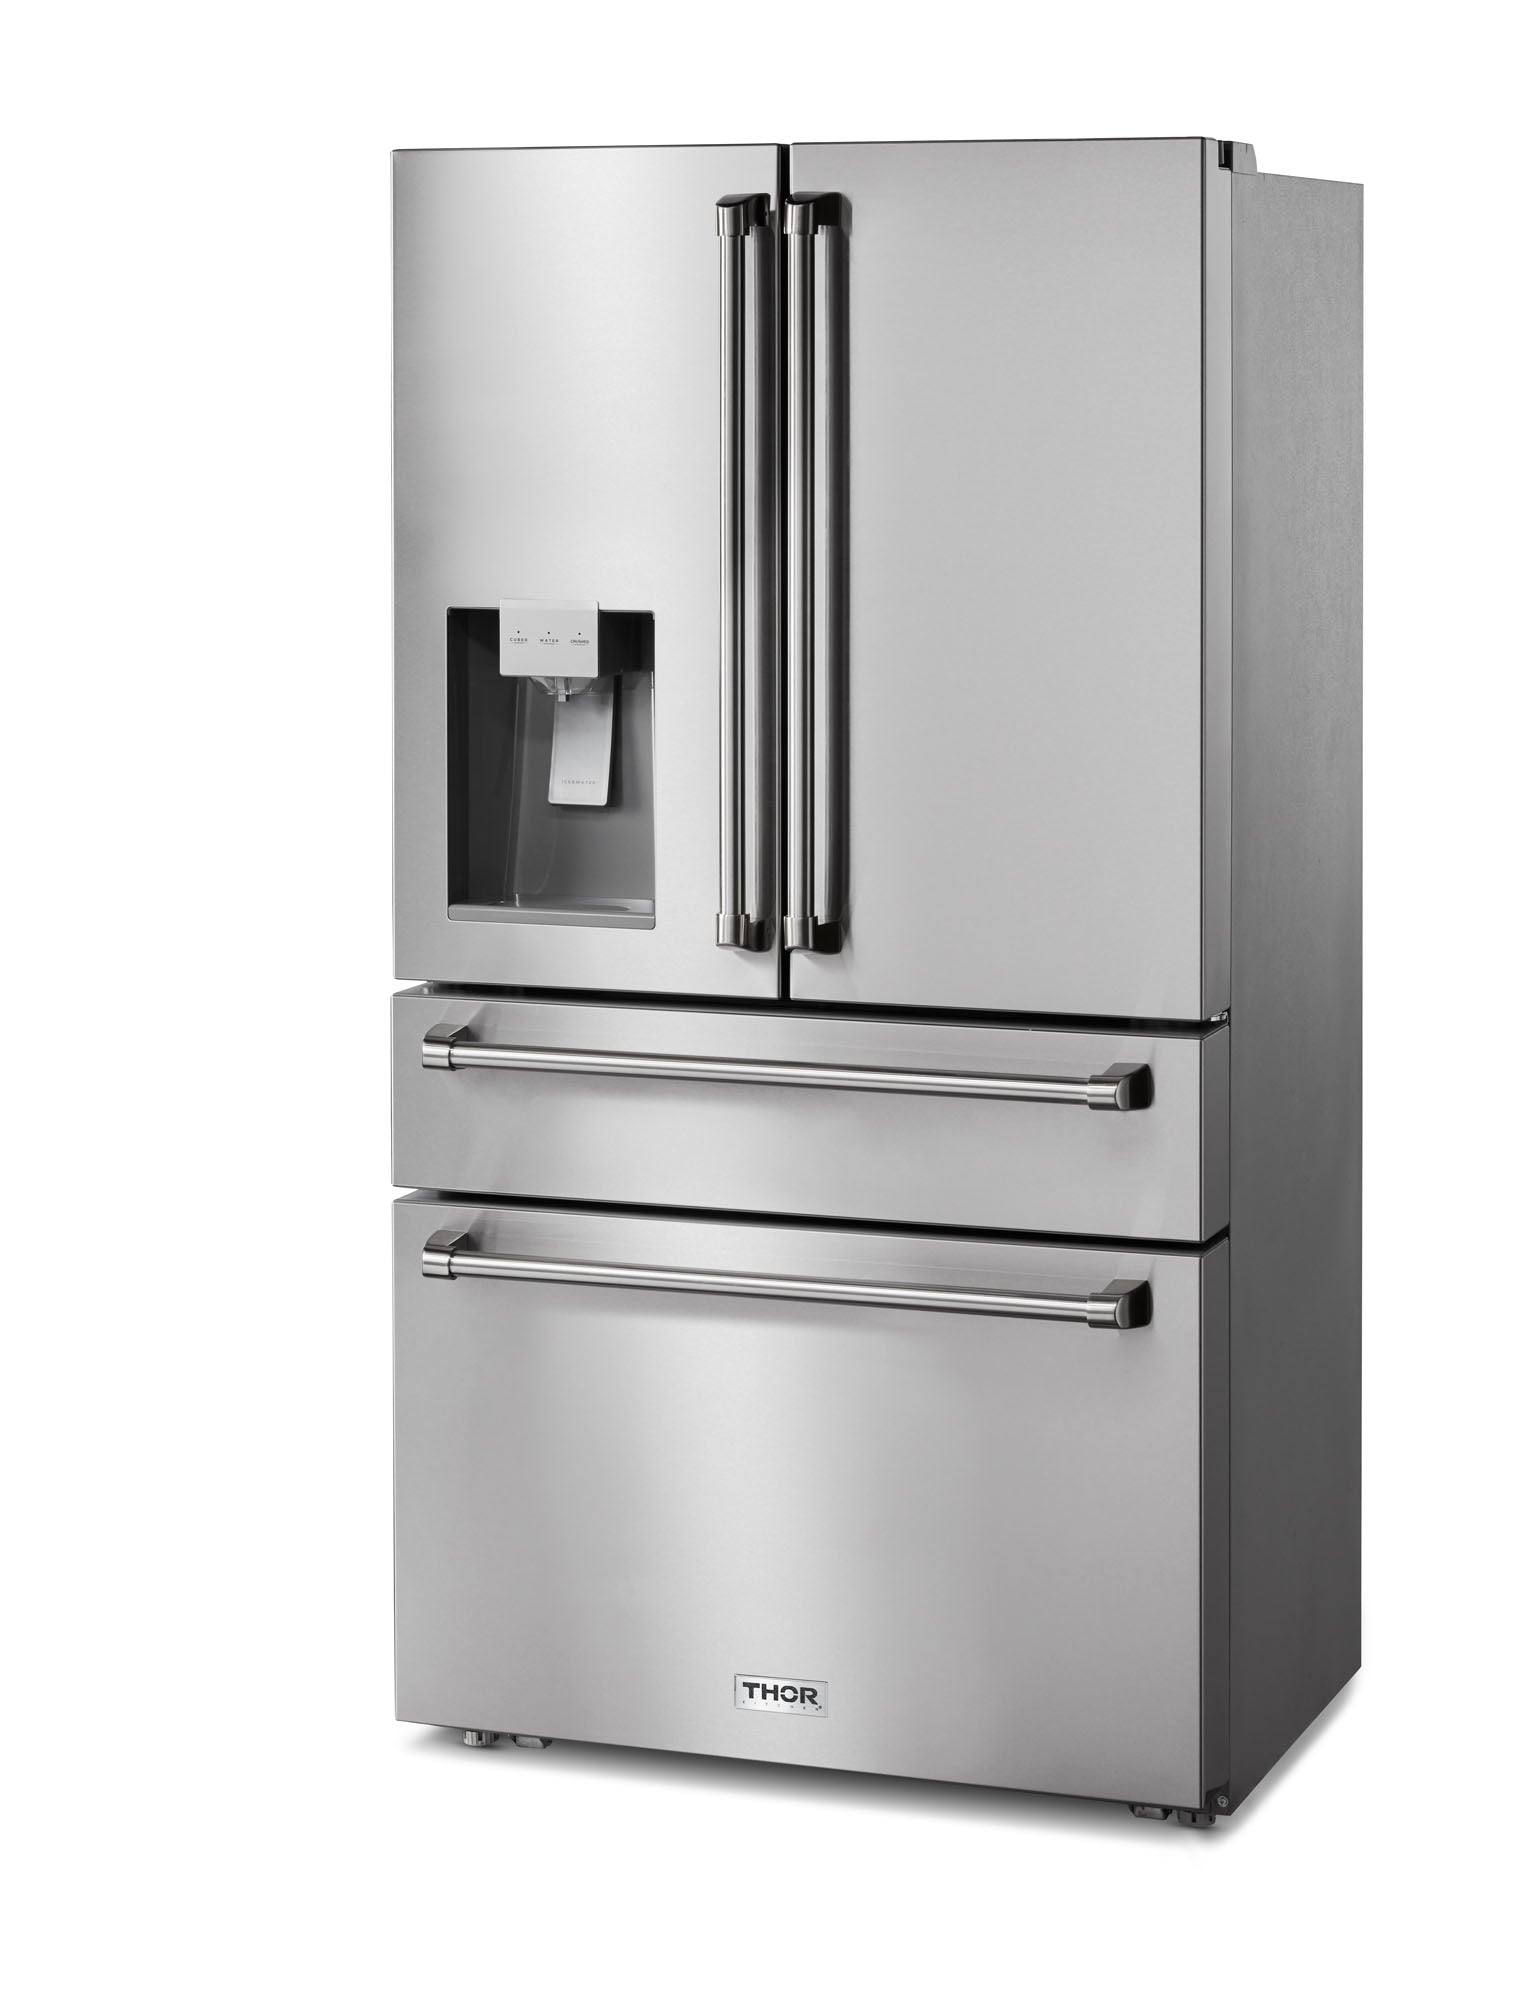 Thor Kitchen 36 Inch Professional French Door Refrigerator with Ice and Water Dispenser- Model TRF3601FD